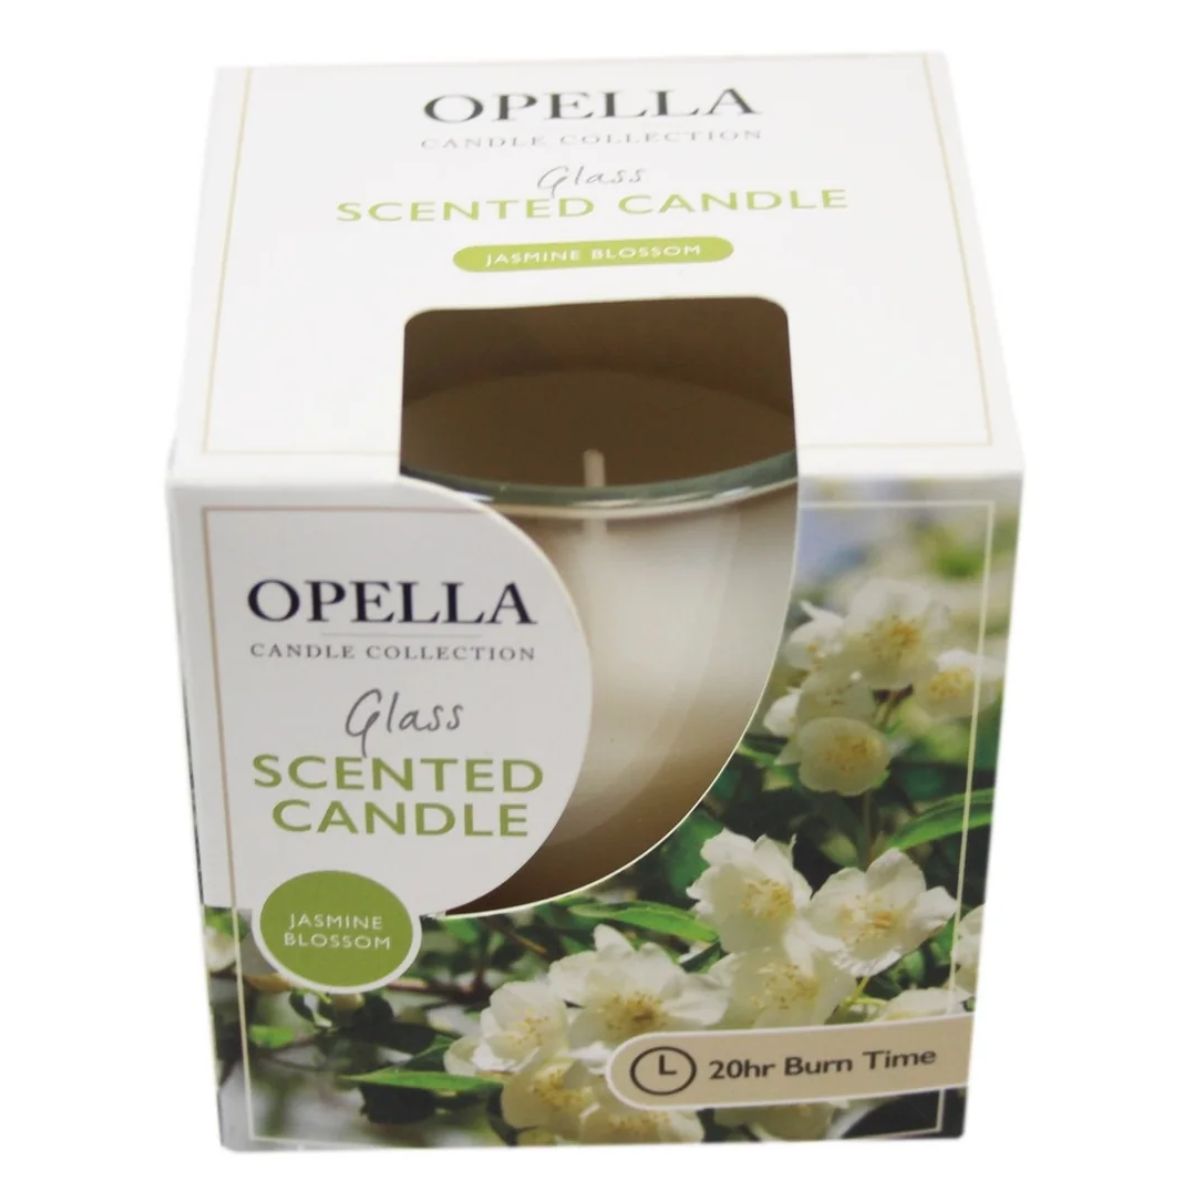 Opella glass scented candle.